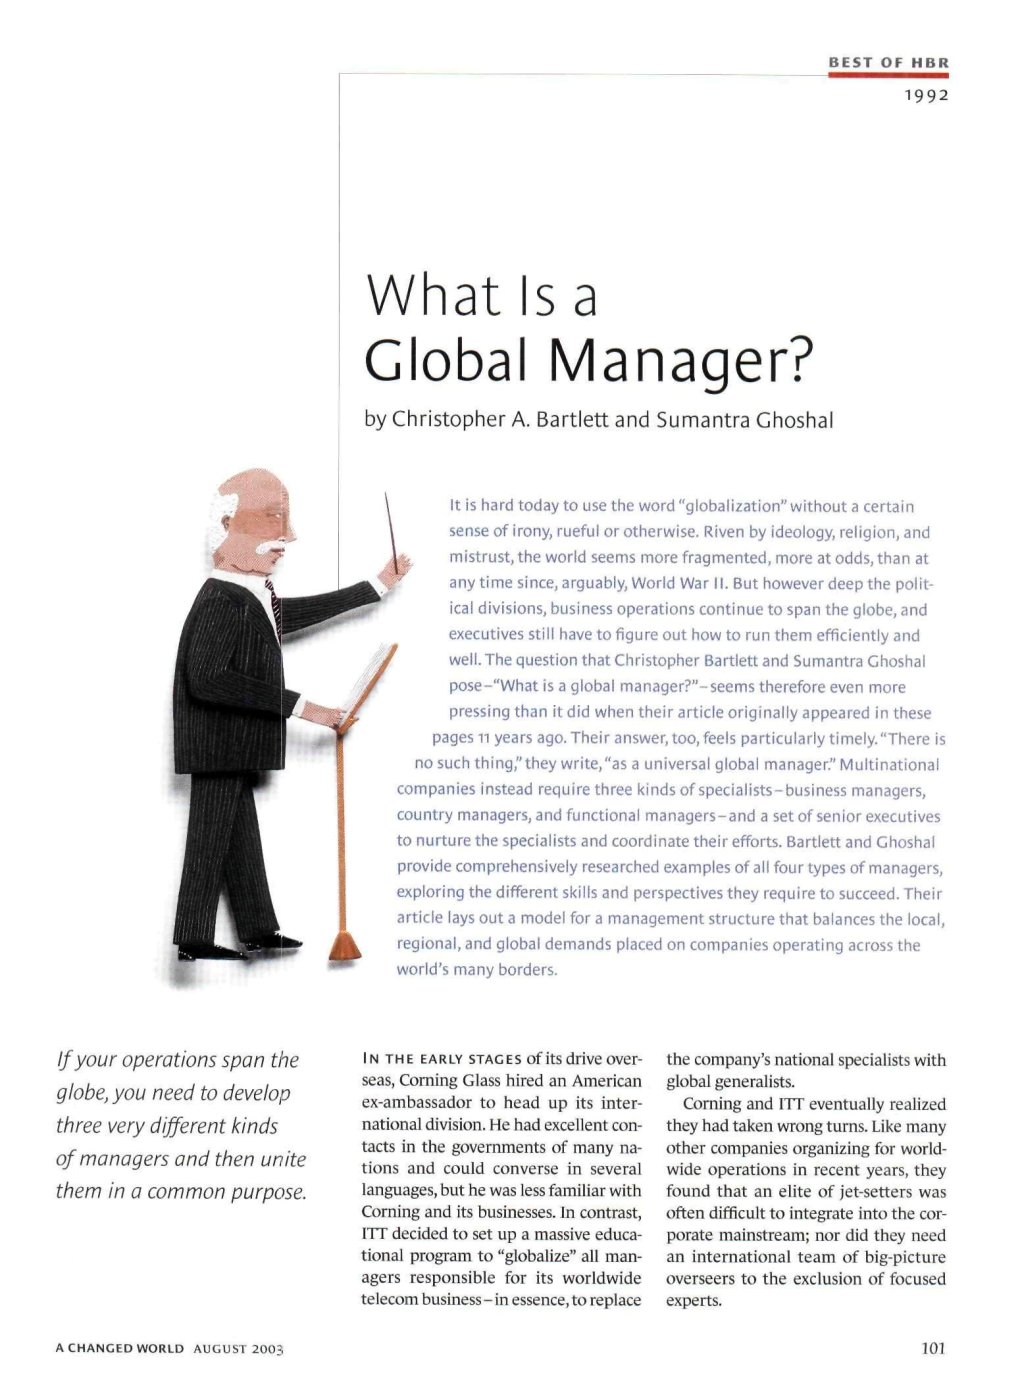 What Is a Global Manager? by Christopher A